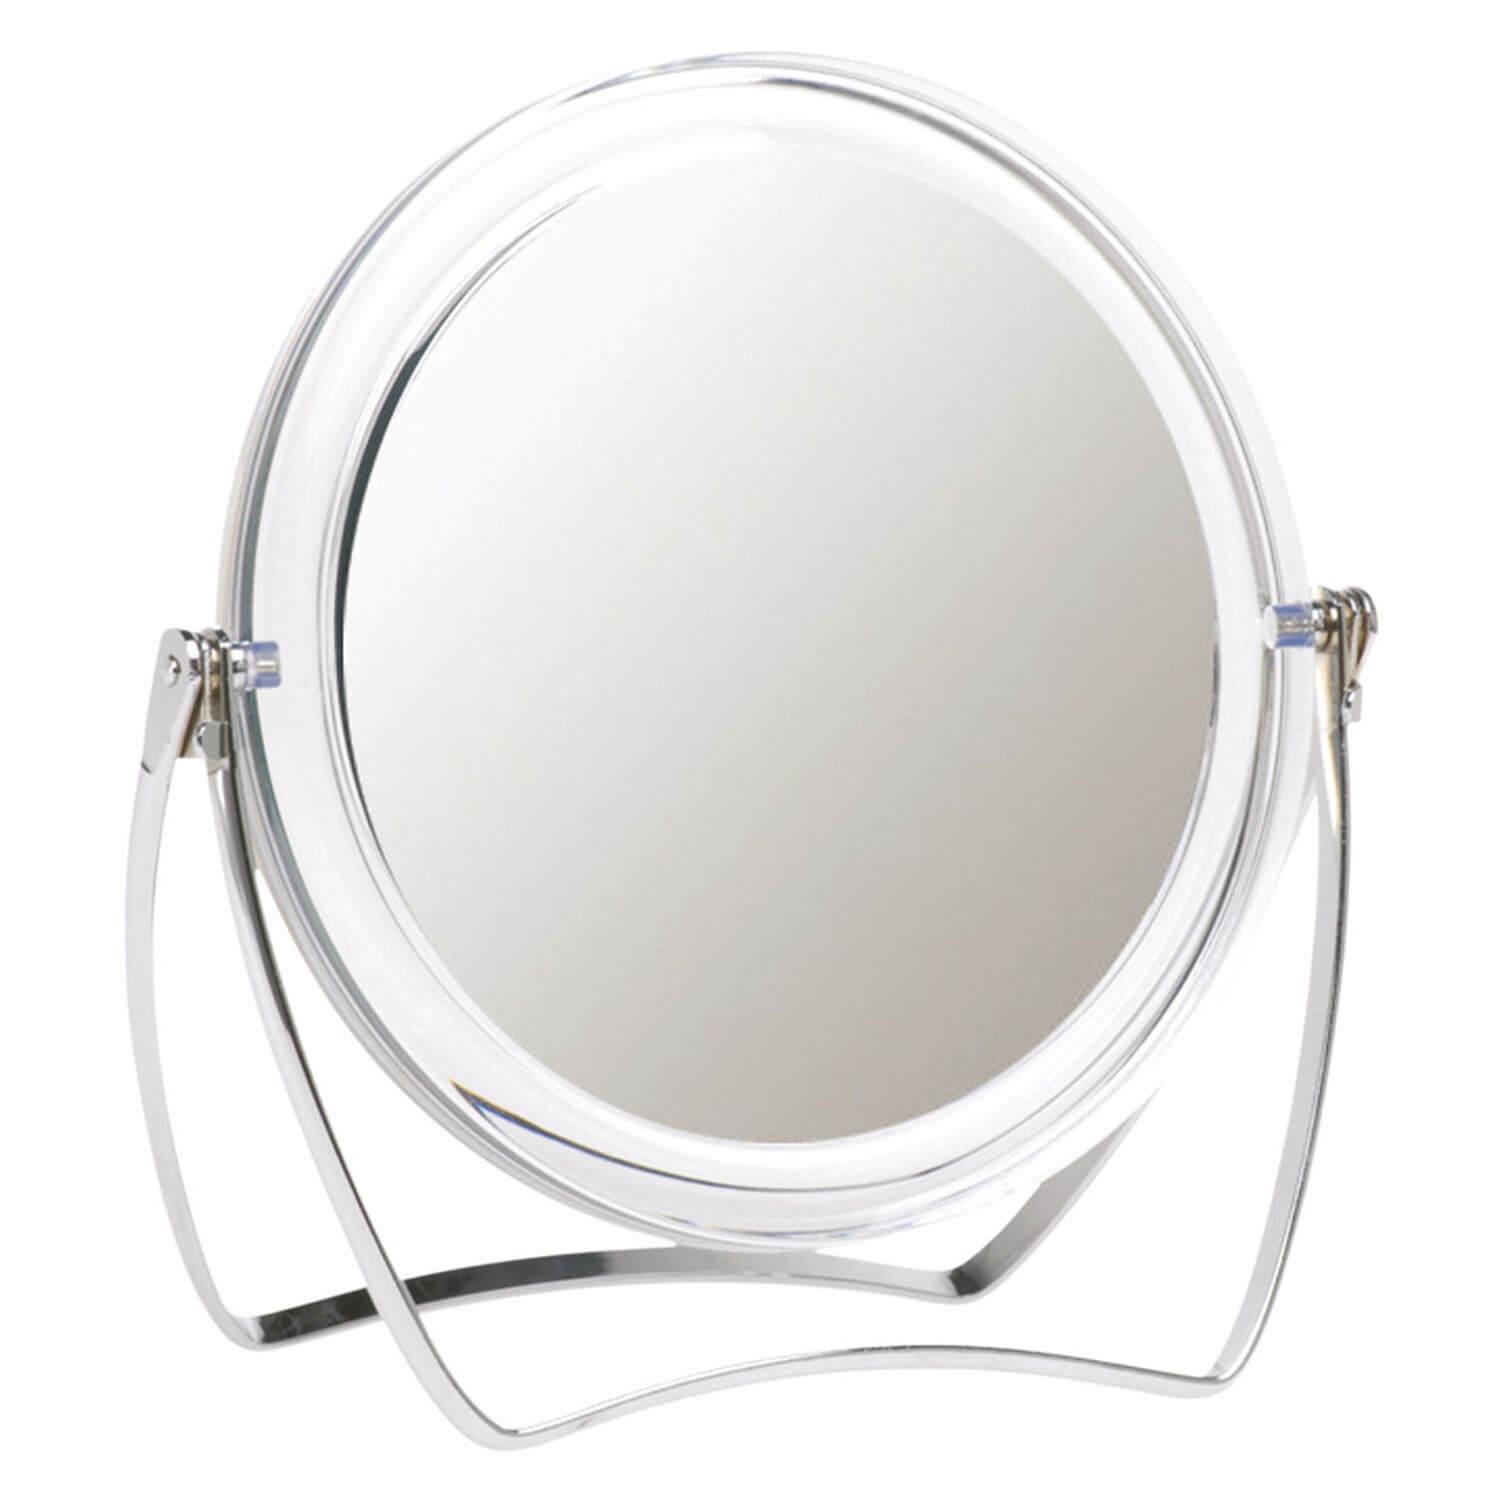 TRISA Beauty - Cosmetic / Shaving Mirror x1 and x5